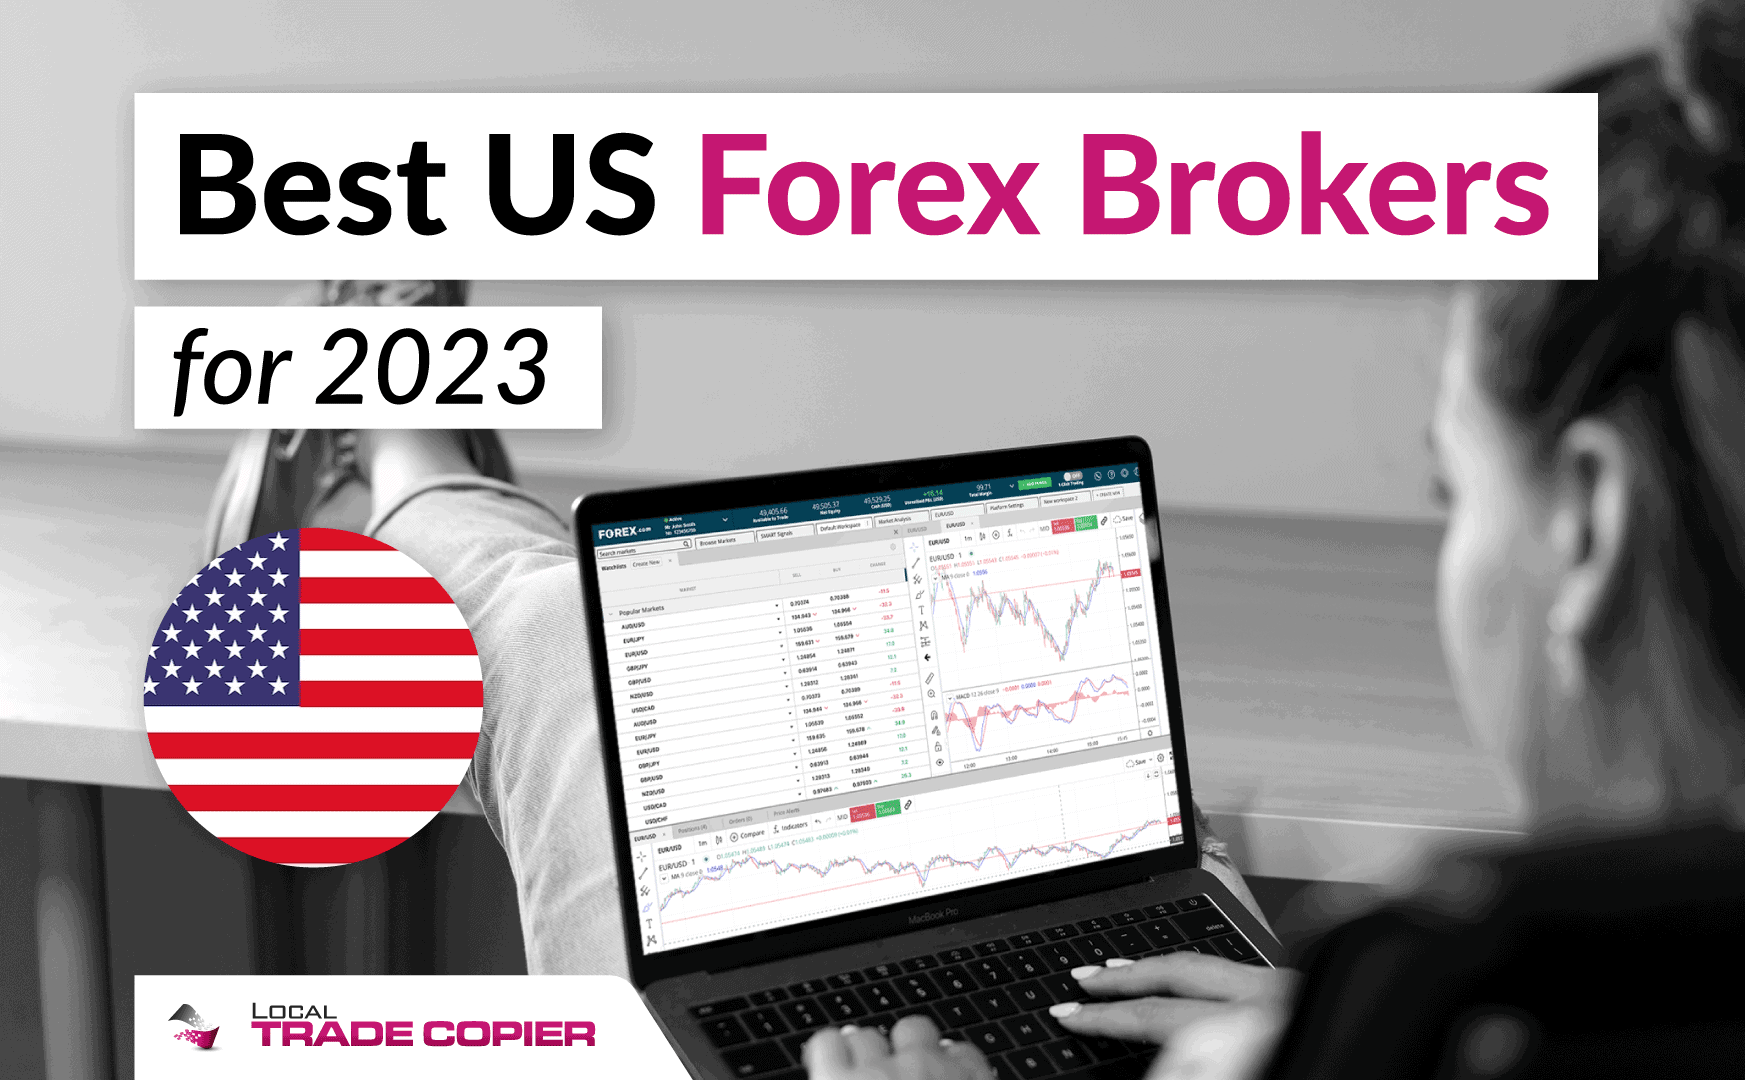 Best US Forex Brokers for 2023